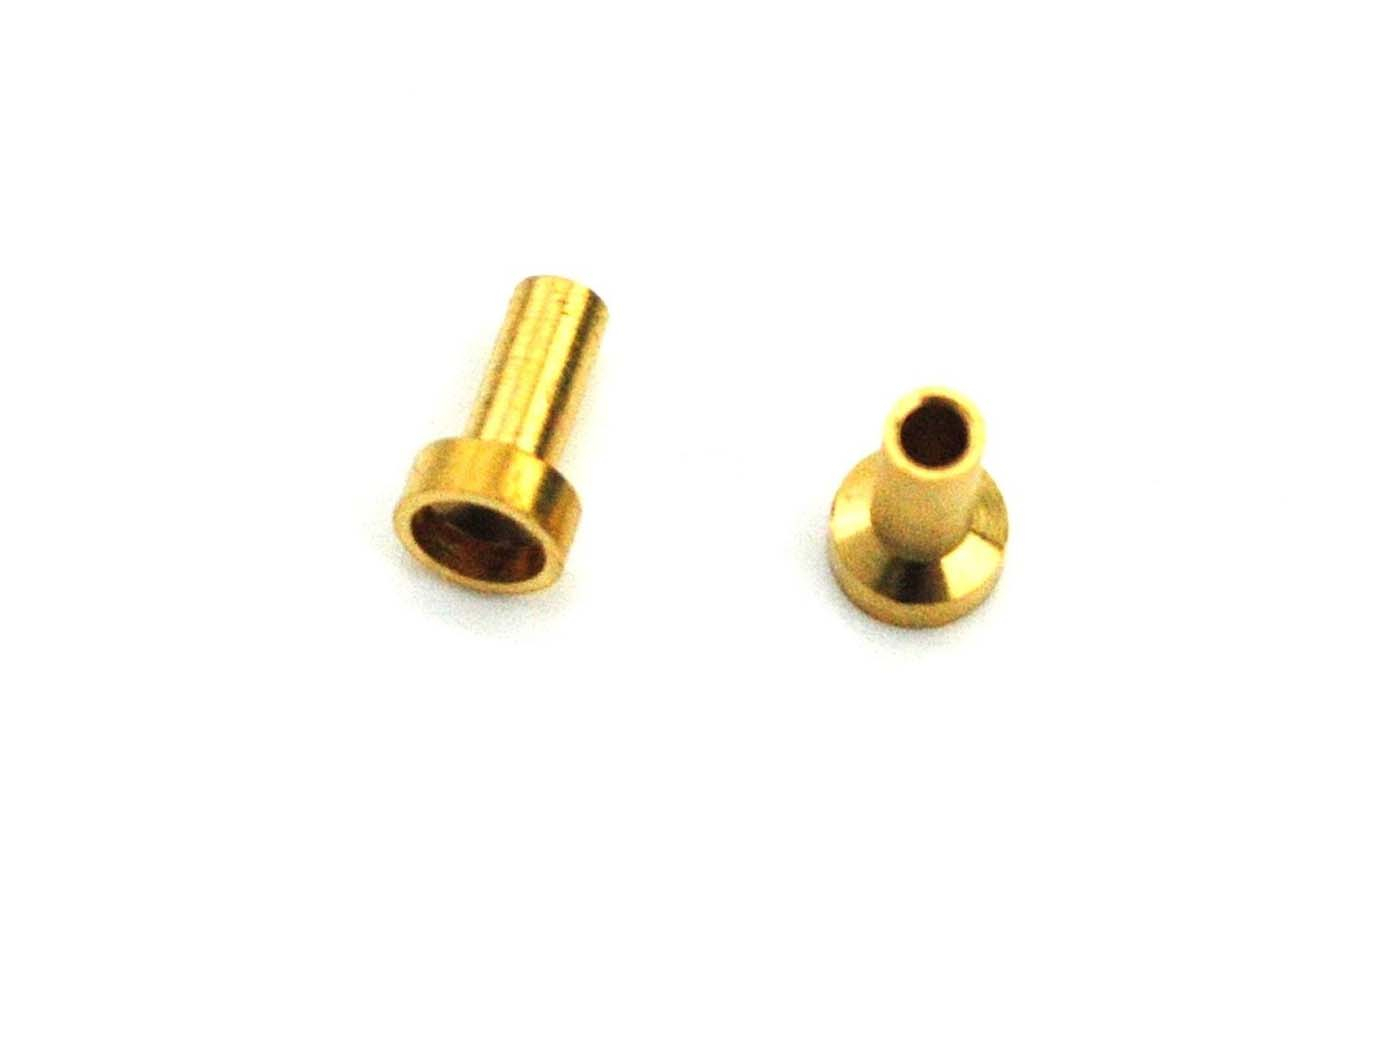 Soldering Nipple For Universal Cable Pulls - 6mm X 3.5mm Mount, 13mm Long, 2.3mm Hole